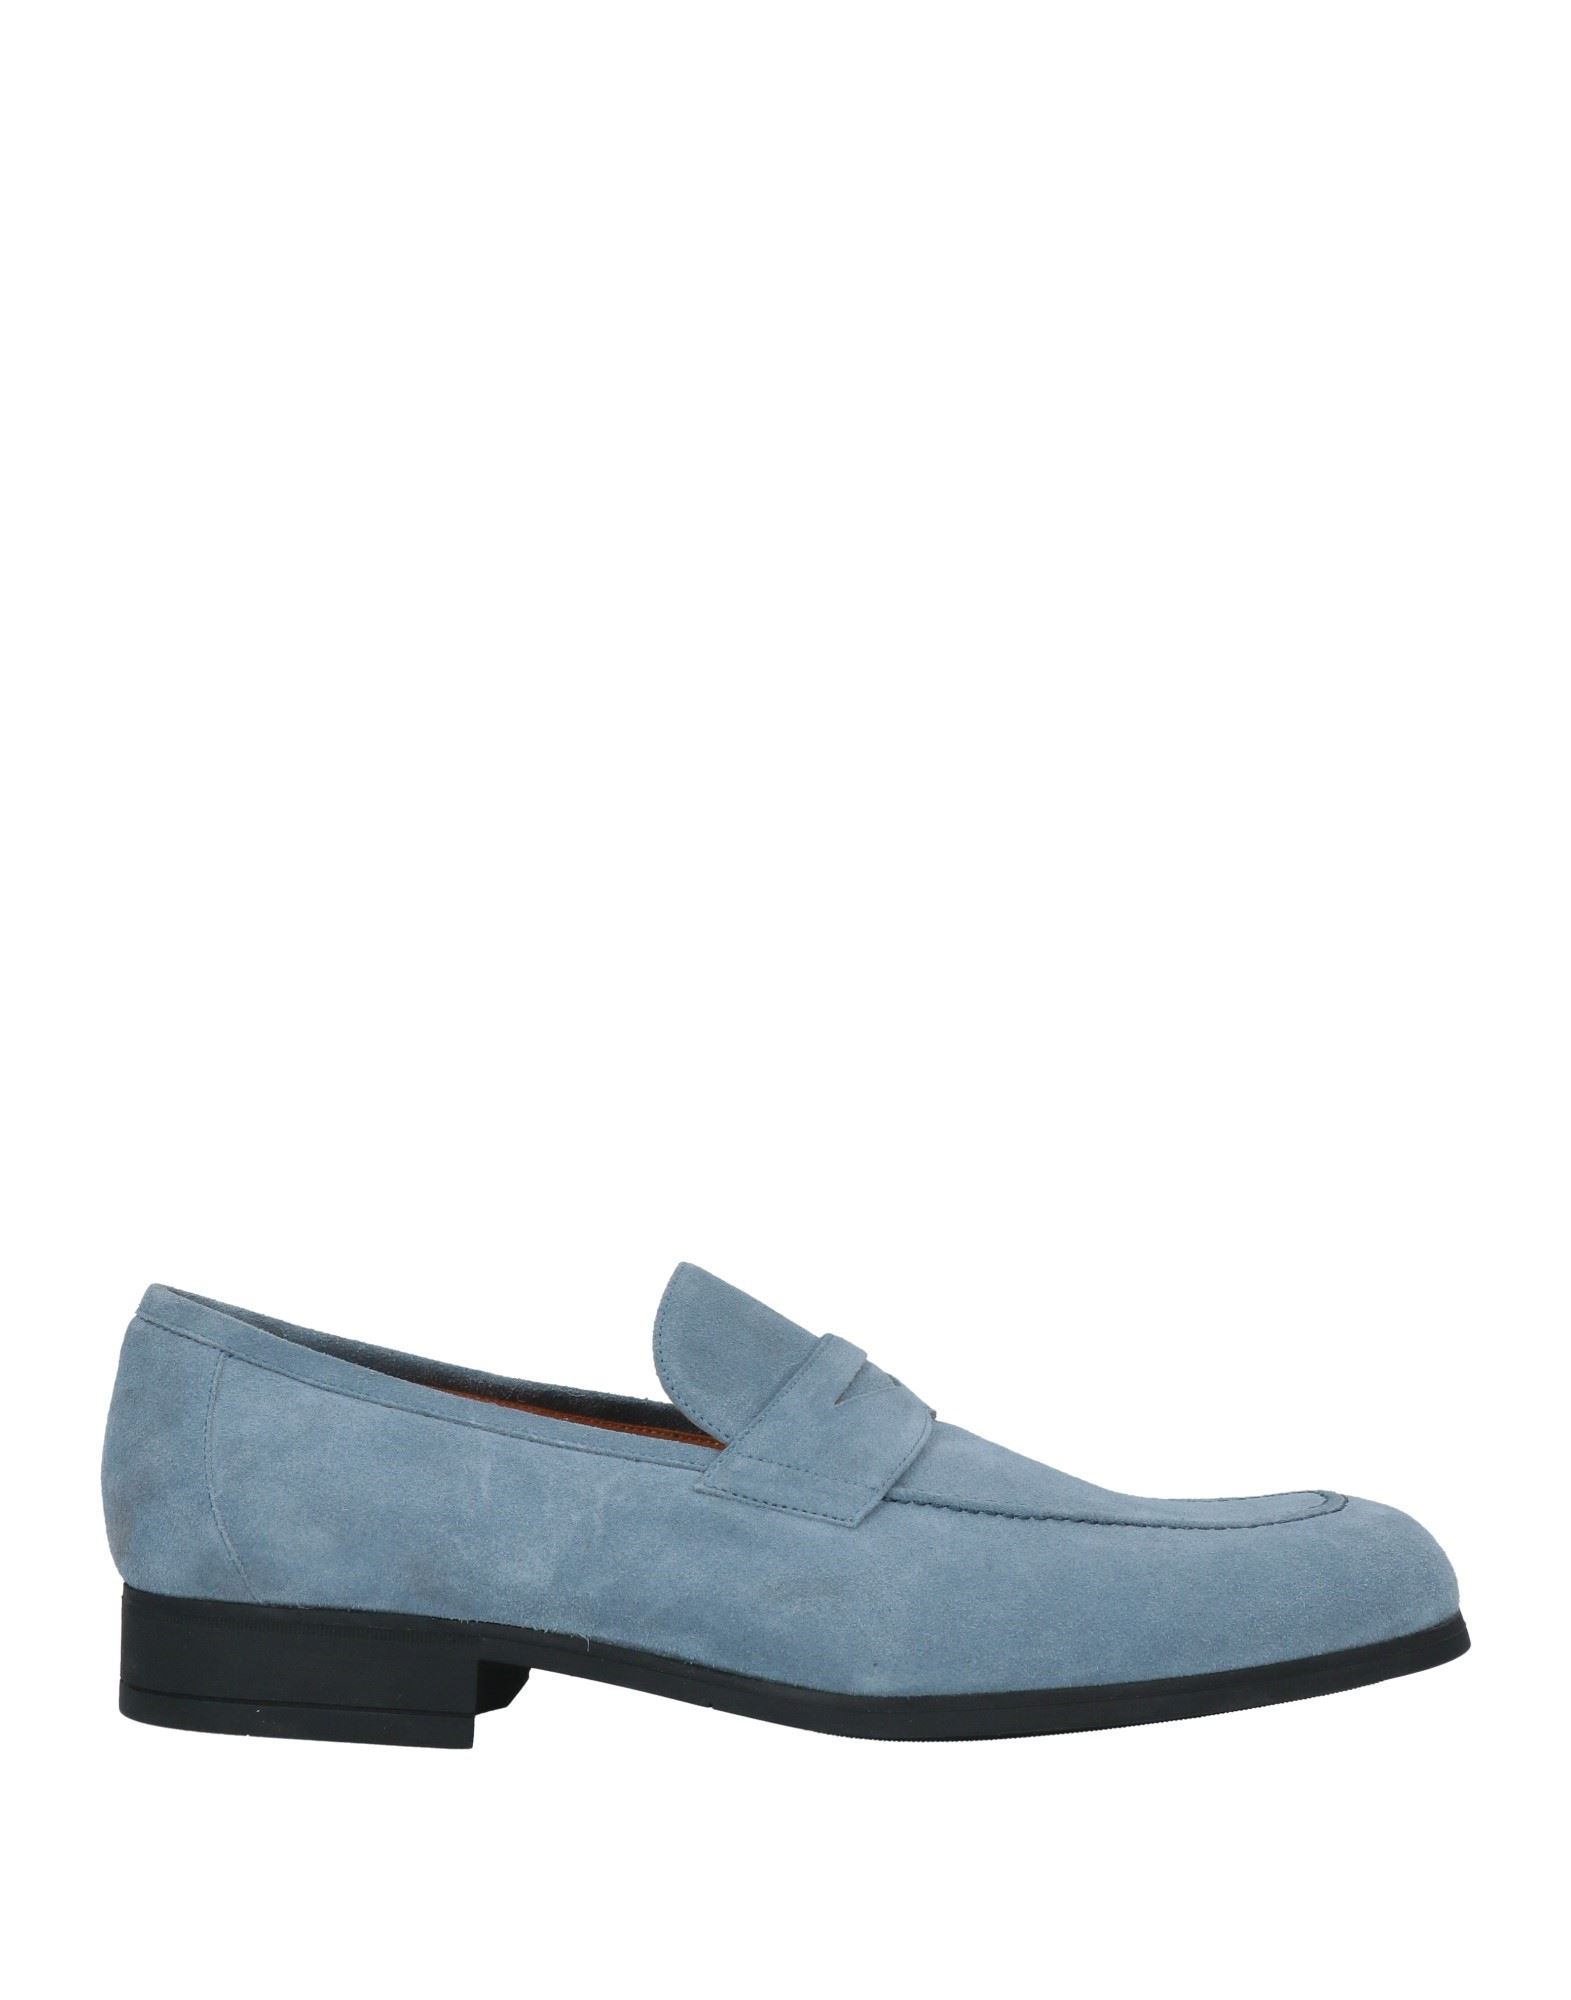 A.testoni Loafers In Pastel Blue